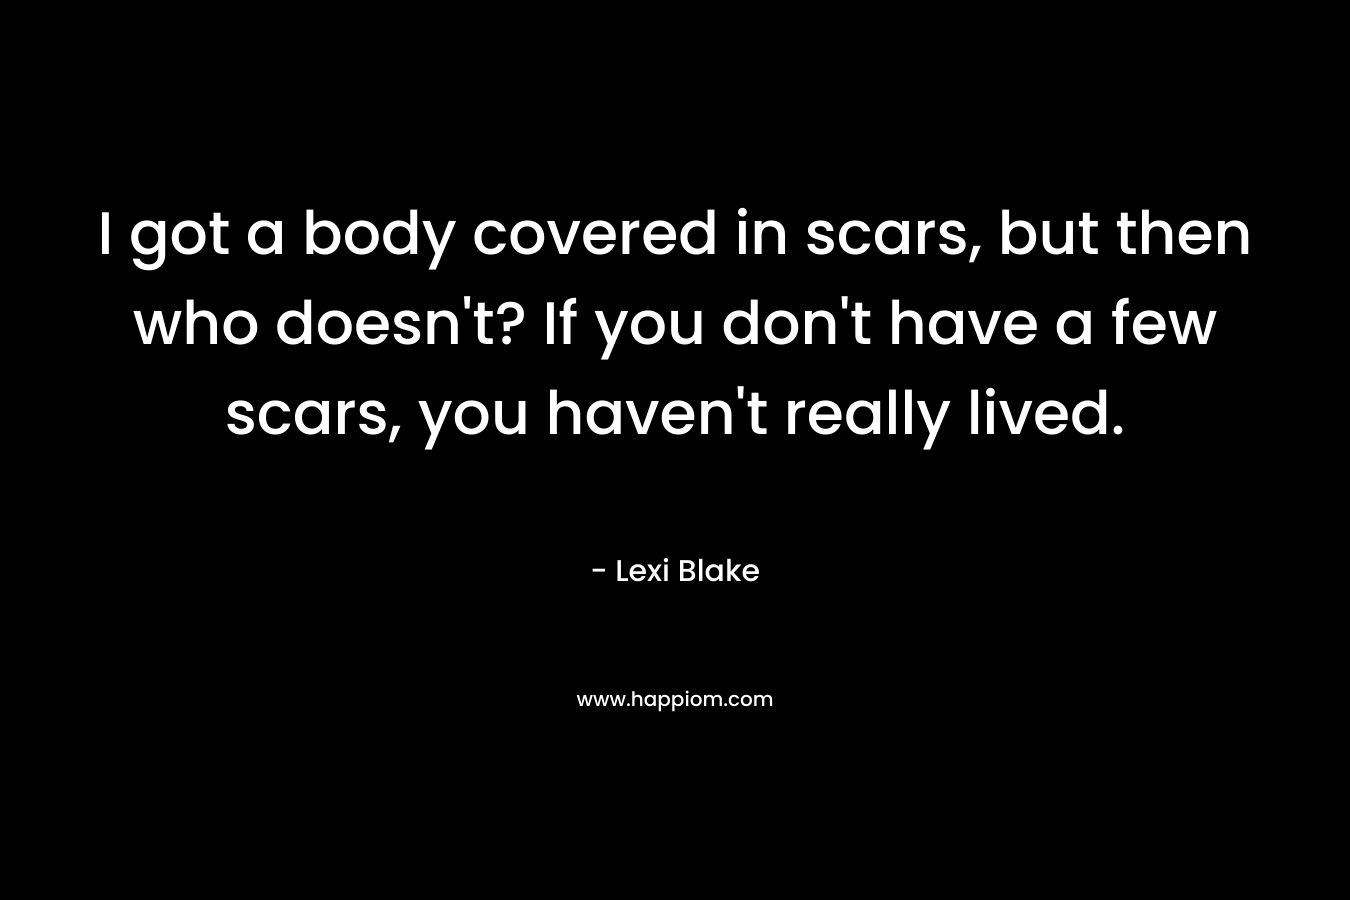 I got a body covered in scars, but then who doesn't? If you don't have a few scars, you haven't really lived.